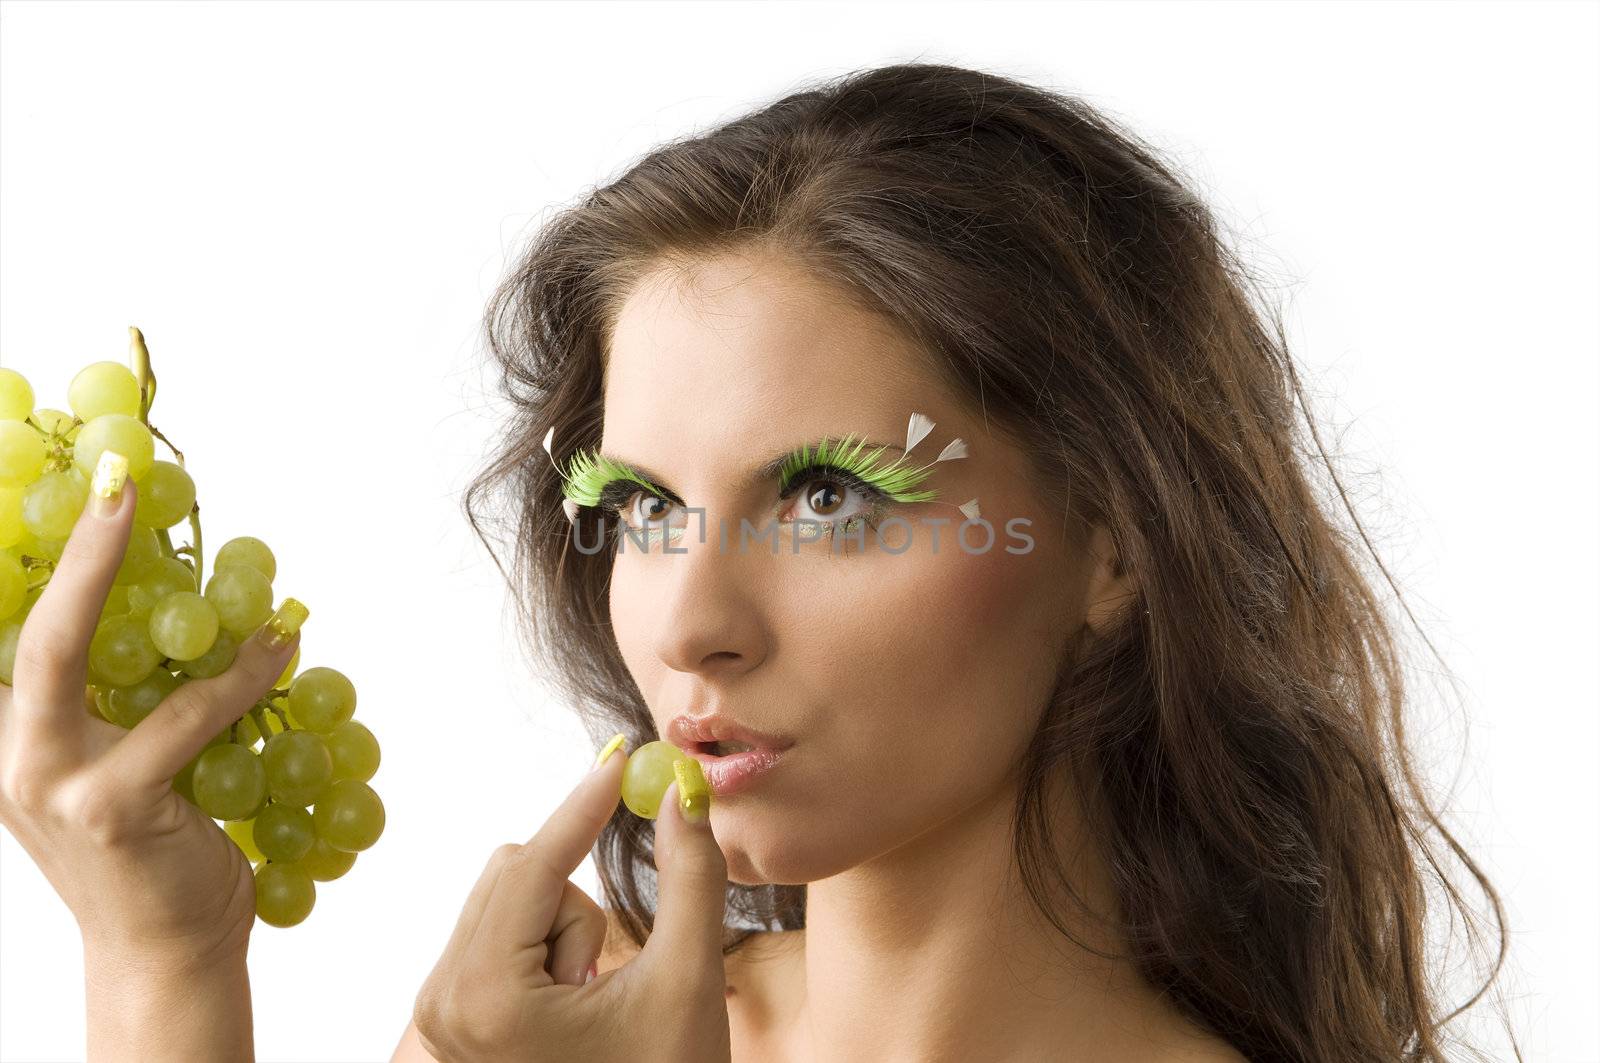 cute brunette with green artificial eyelashes eating a green grape